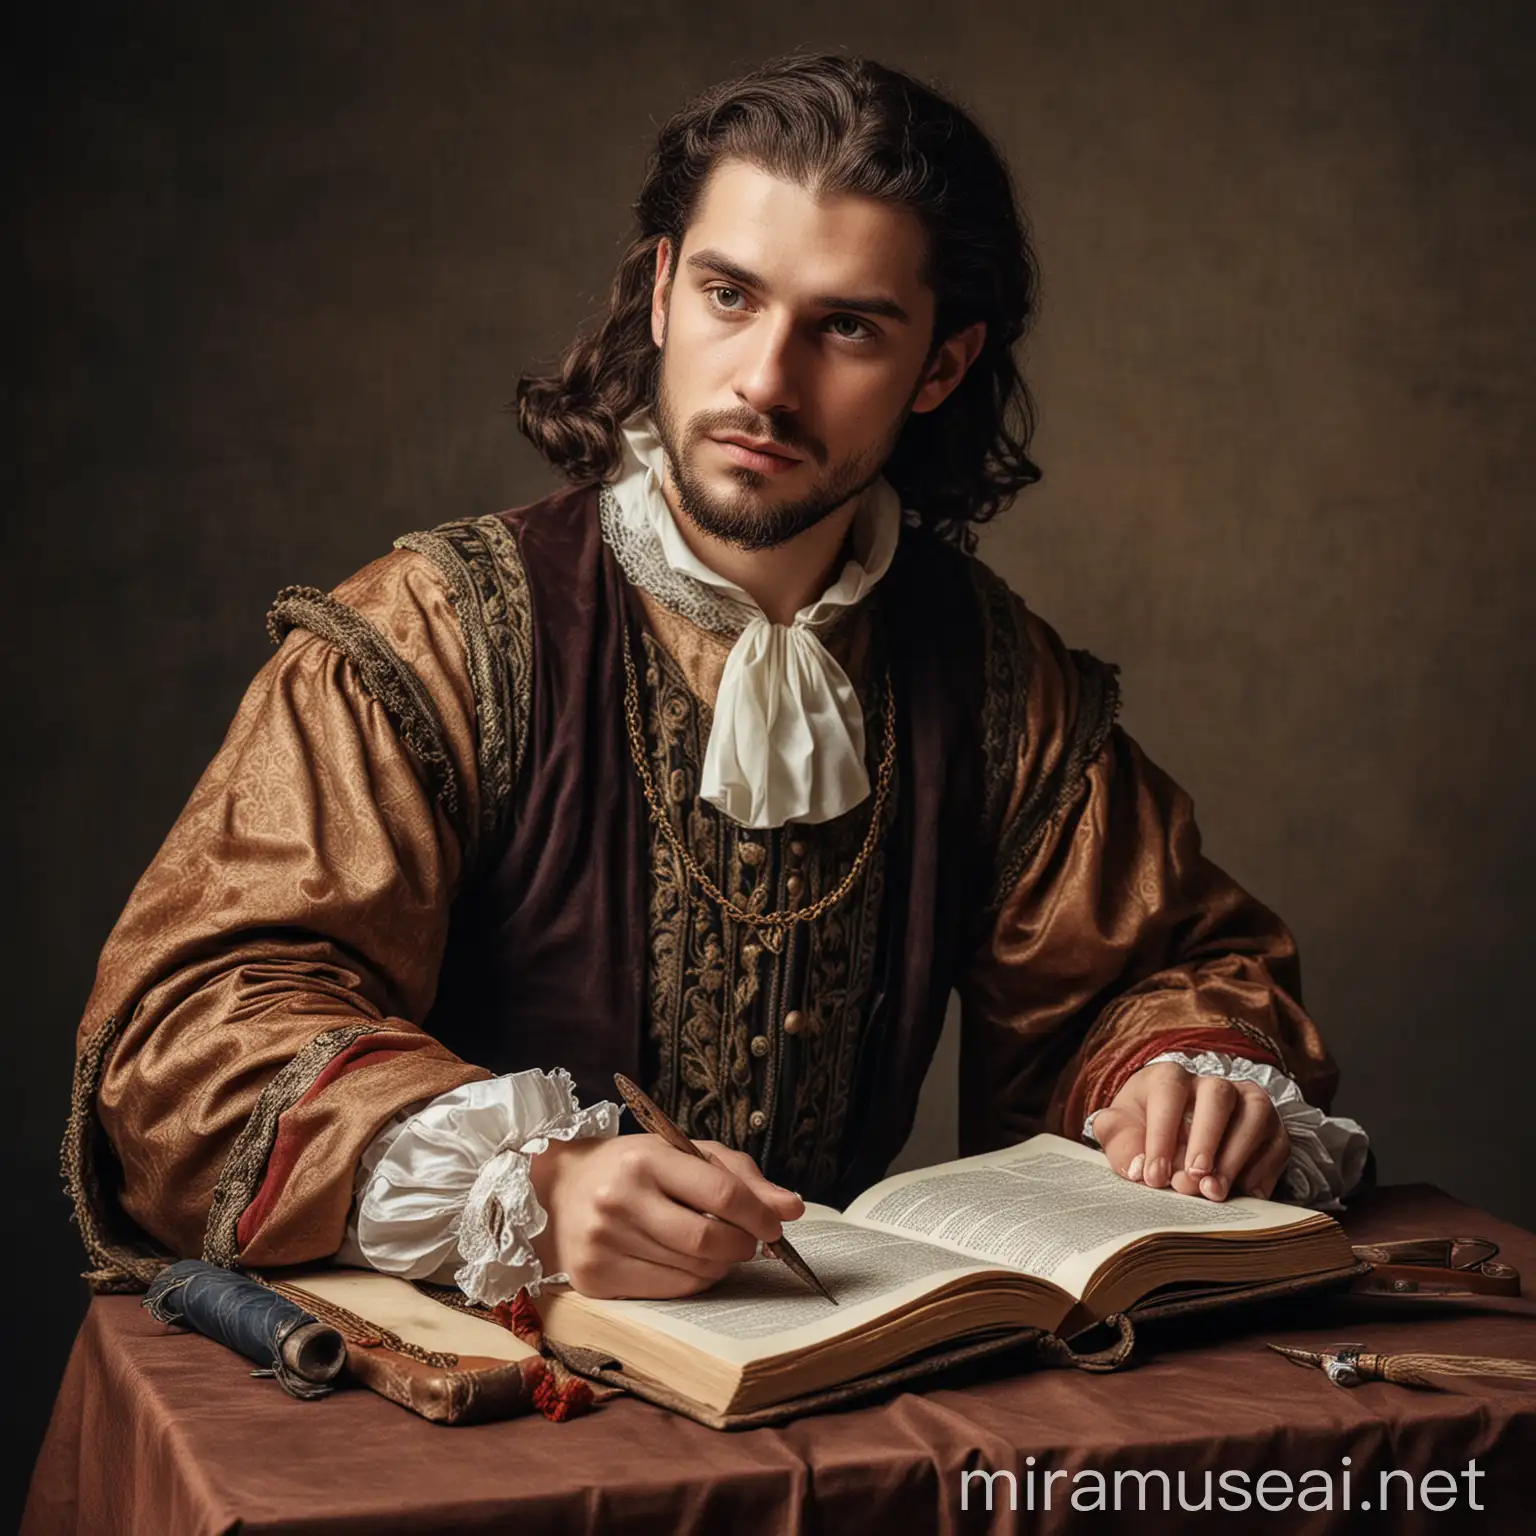 Medieval Nobleman Writing with Quill and Book